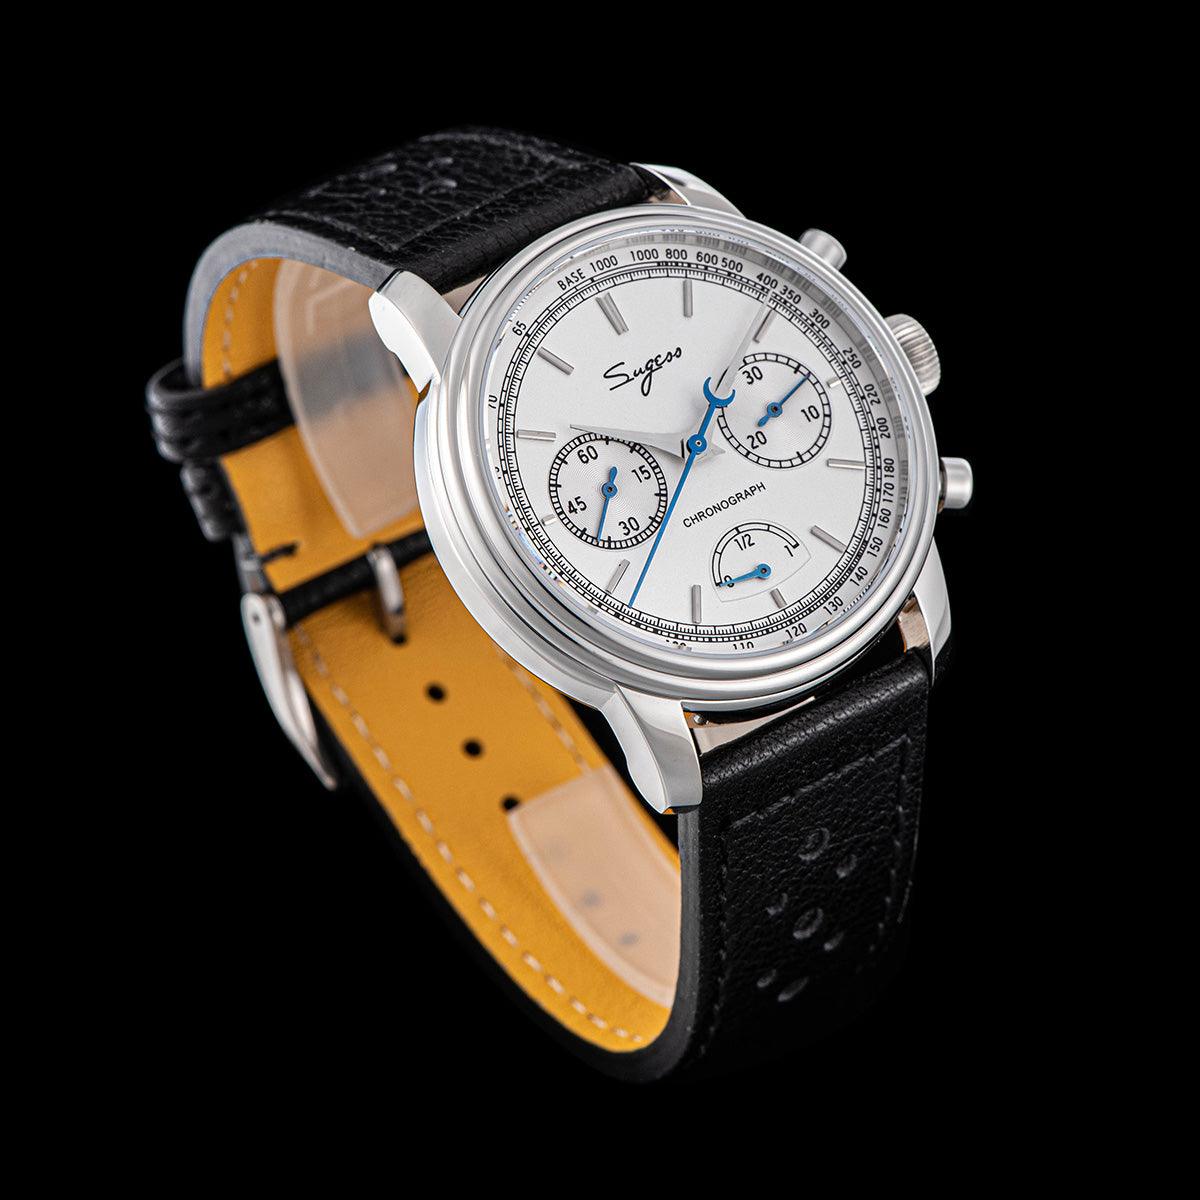 Sugess ST1906 White Dial Multi-Function Mechanical Power Reserve Seagull Movement Men's Watch - Murphy Johnson Watches Co.